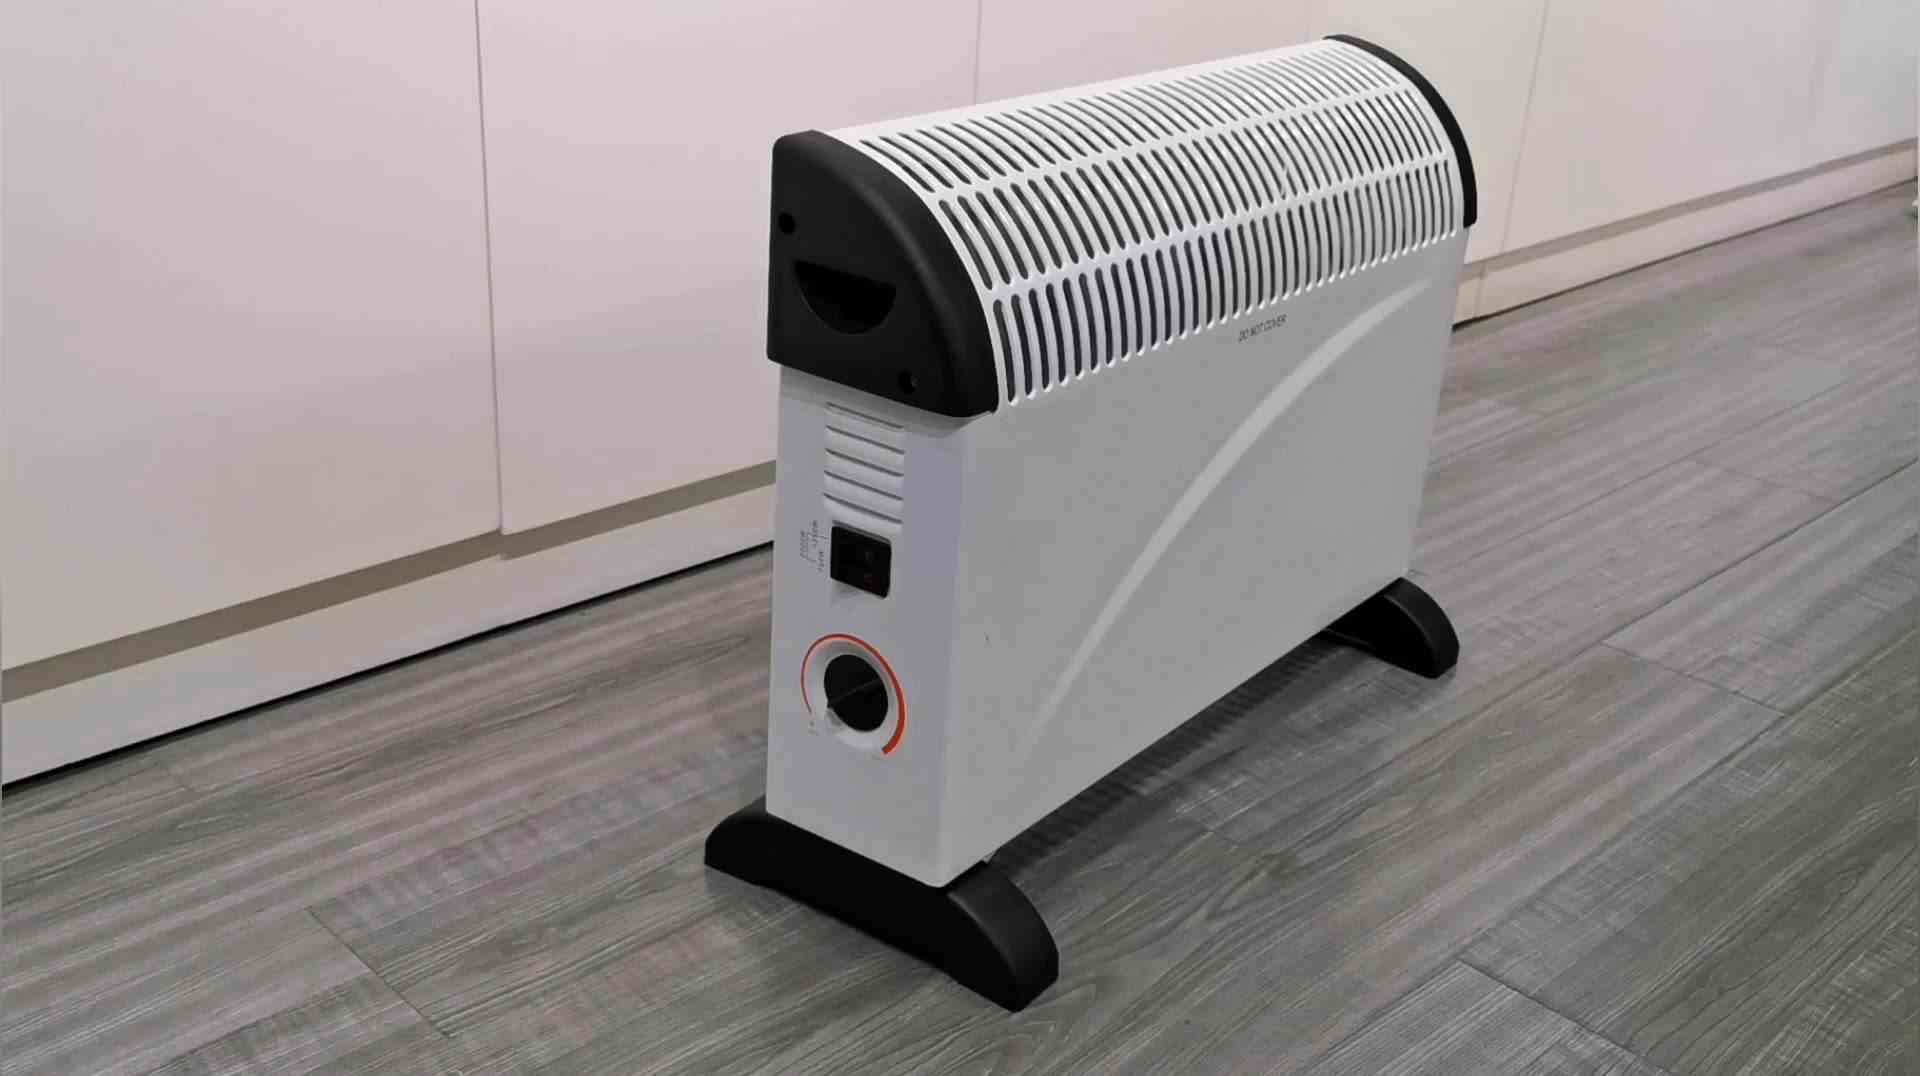 Portable Heaters For Indoor Use 2000w 2 Gears Adjustable (2)